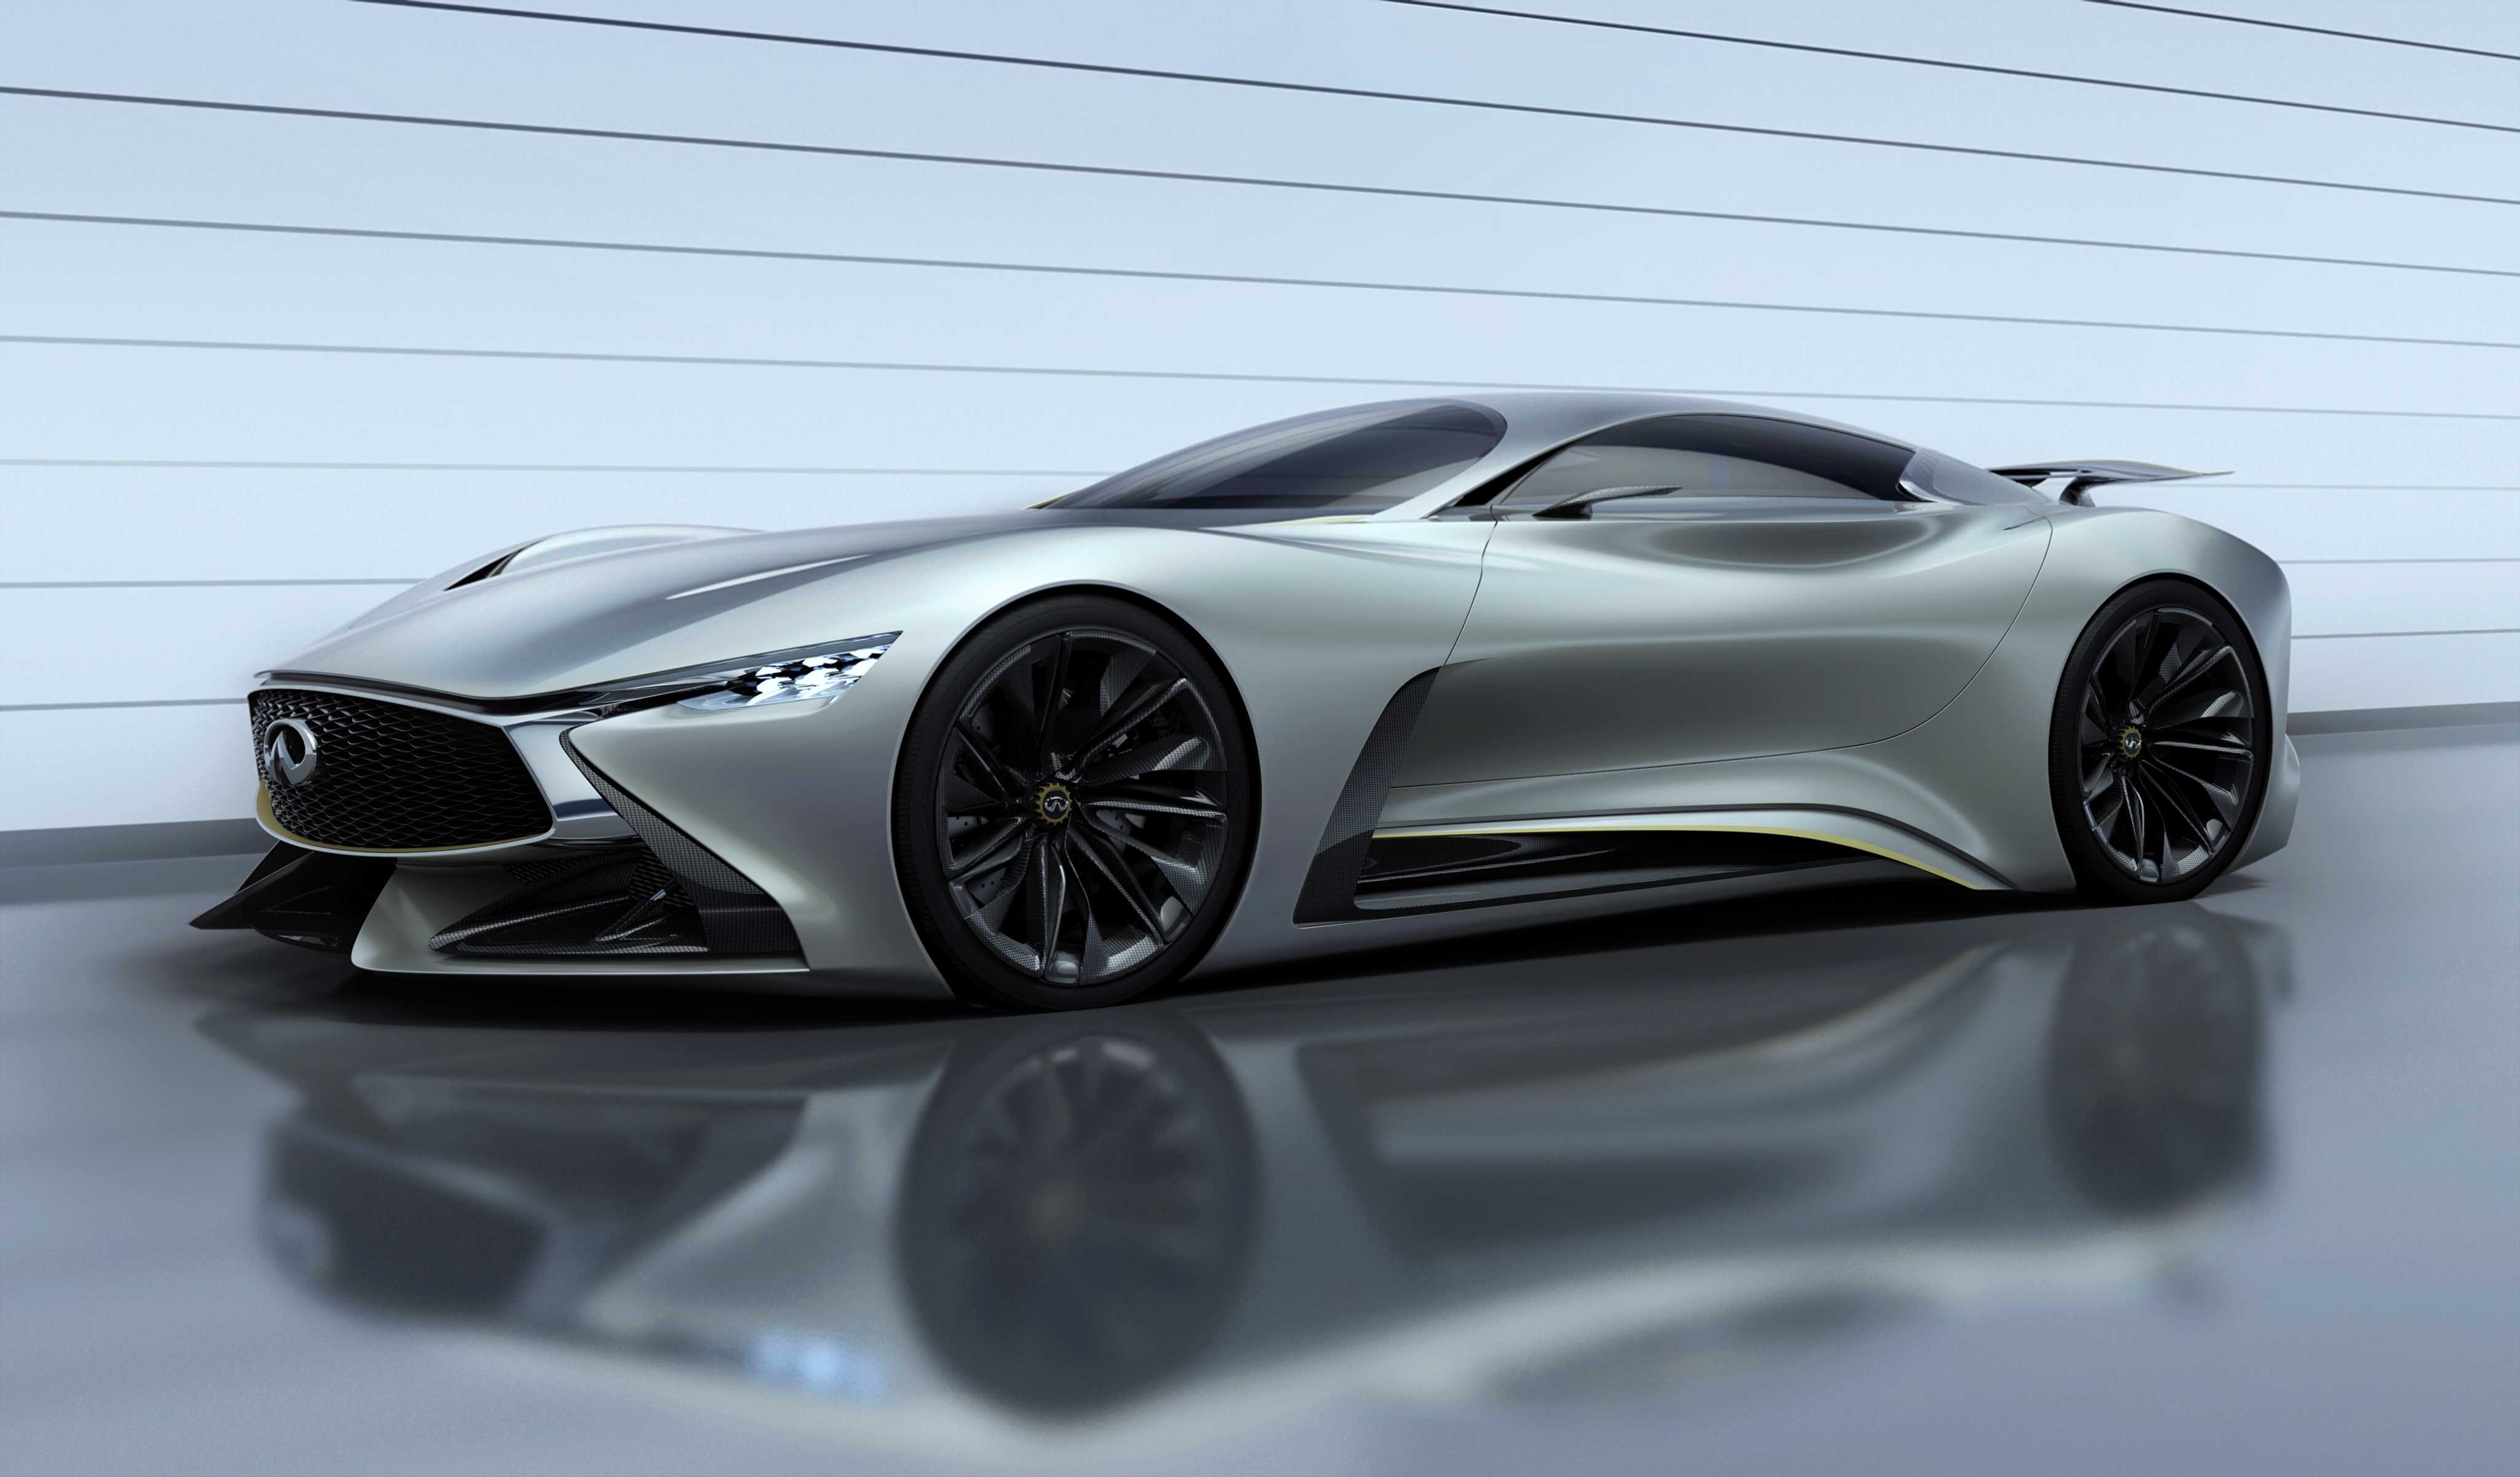 74930 download wallpaper infiniti, cars, concept, 2014, gran turismo, vision screensavers and pictures for free